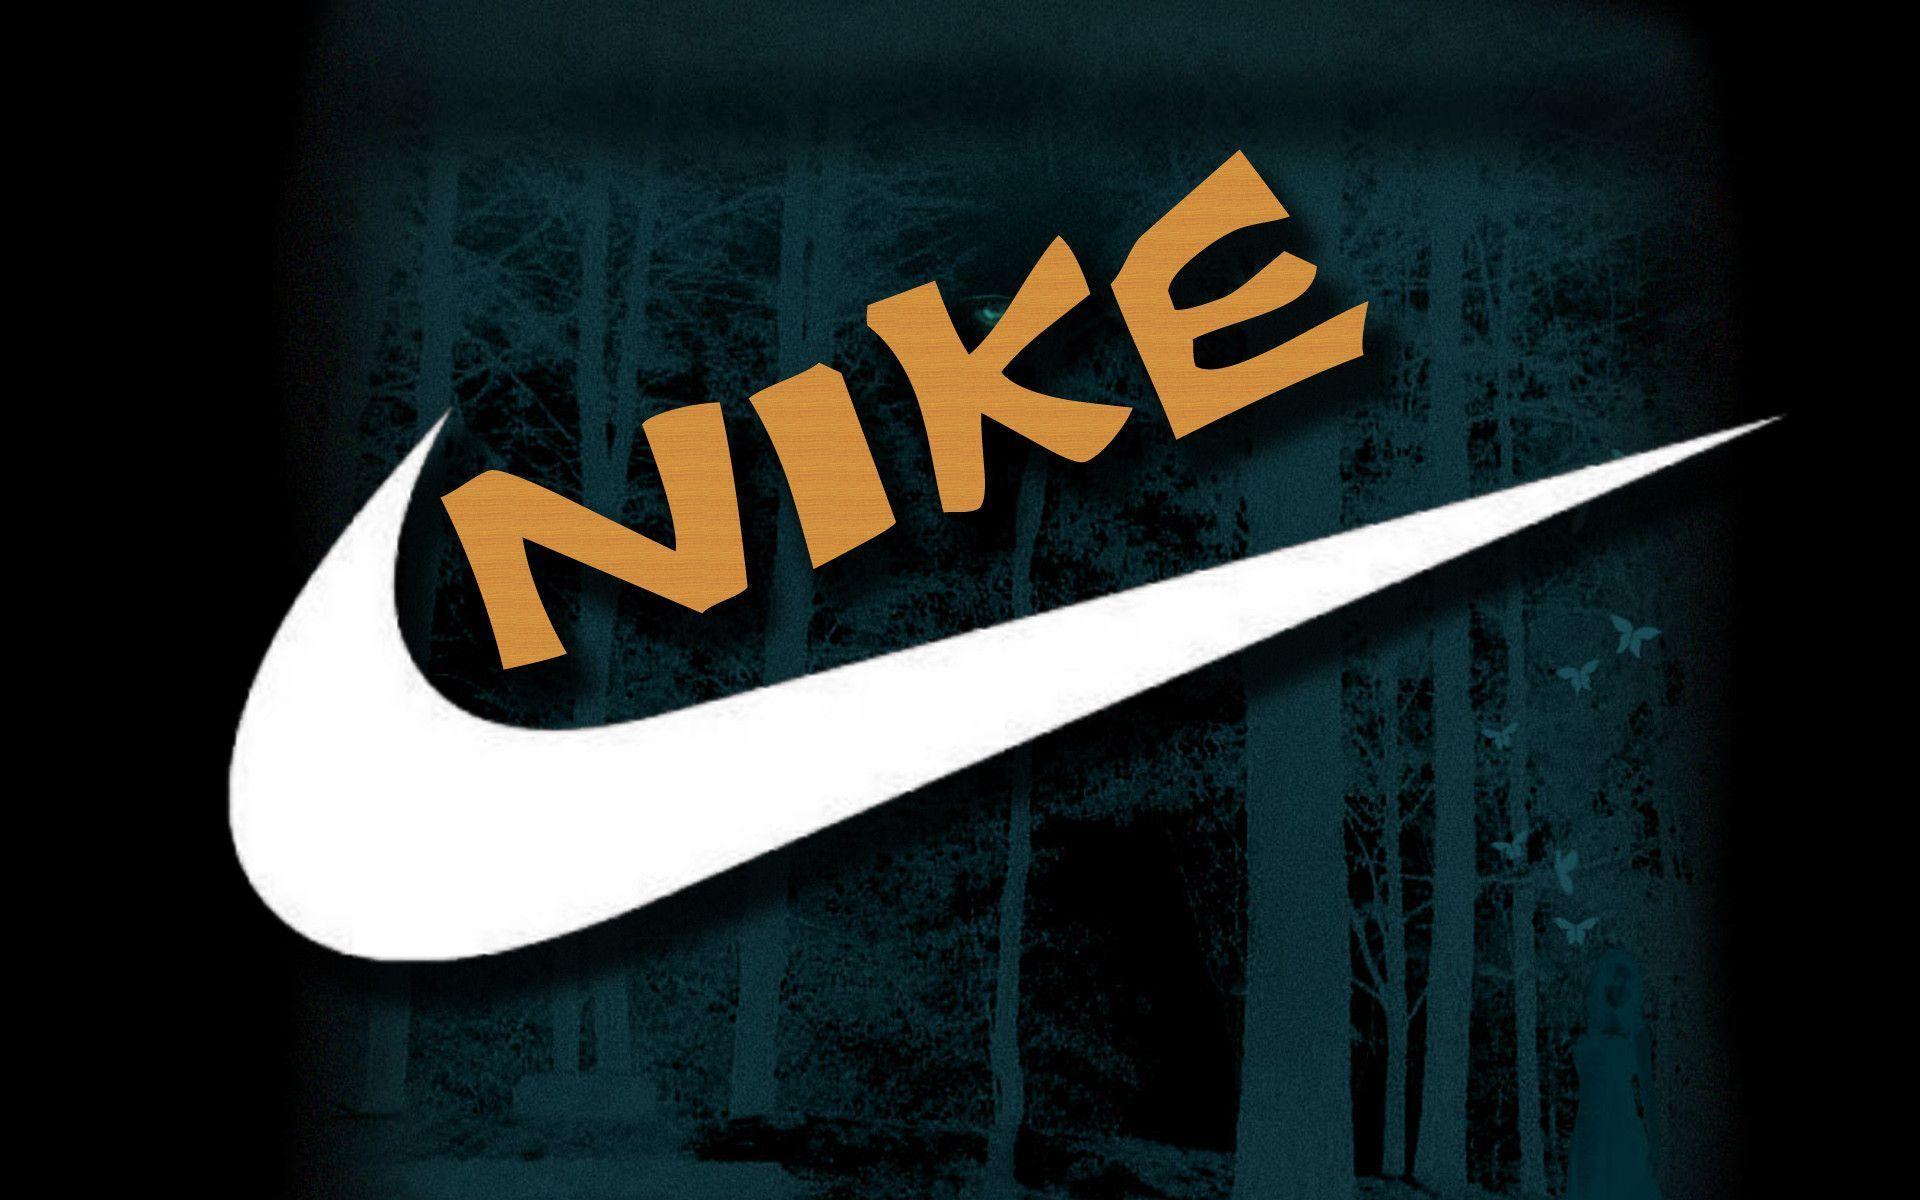 Cool Nike Wallpapers For Iphone Pics For Nike Shoe Wallpaper Iphone Pict  Background For Iphone  फट शयर